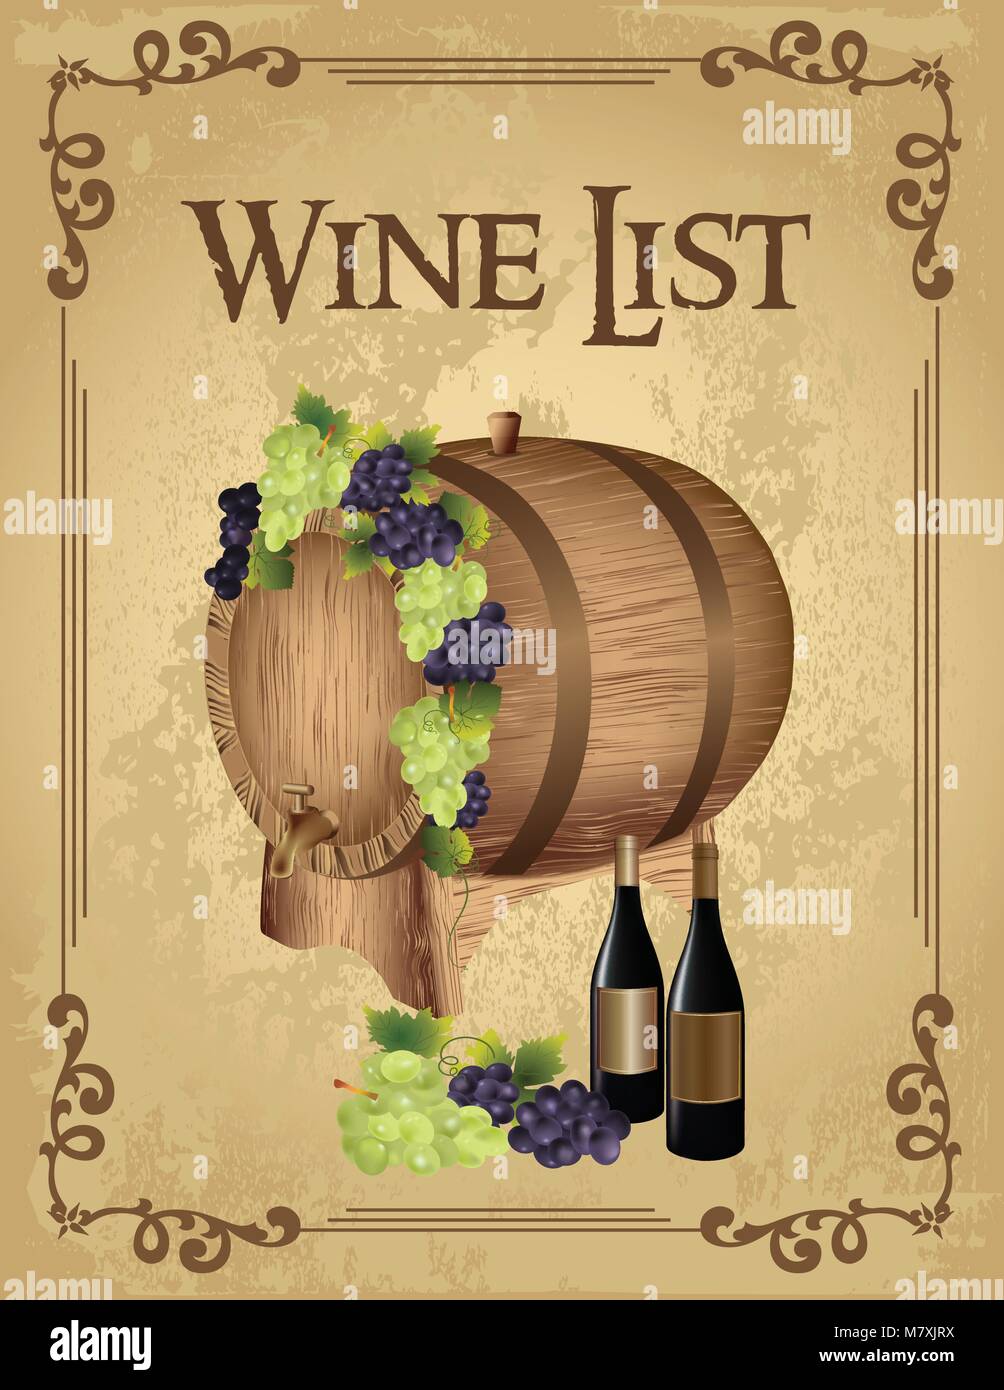 Wine list poster with a wooden barrel and wine bottle Stock Vector